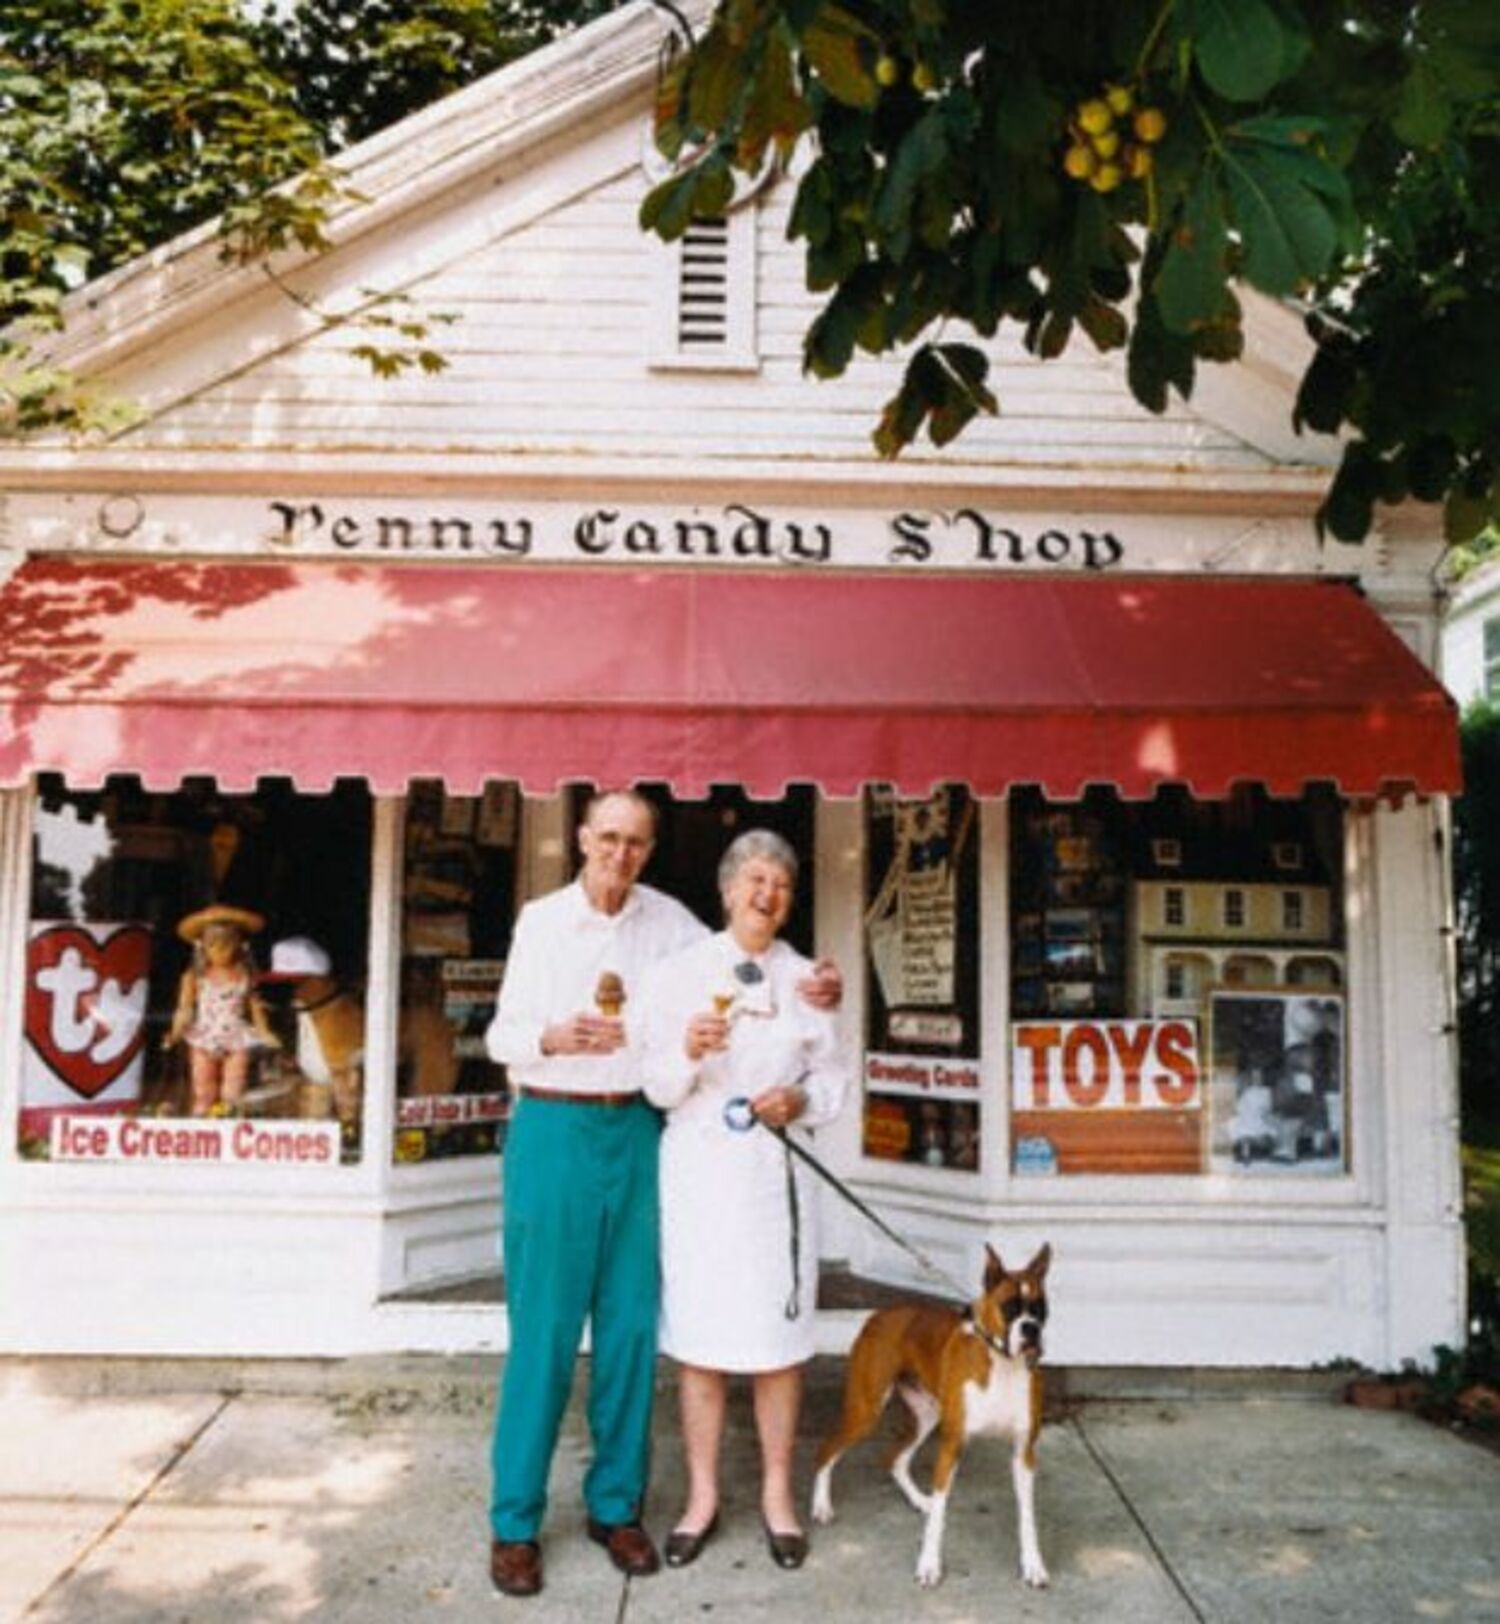 June Morris, Proprietor of the Penny Candy Shop, Remembered as Matriarch of Water Mill - 27 East